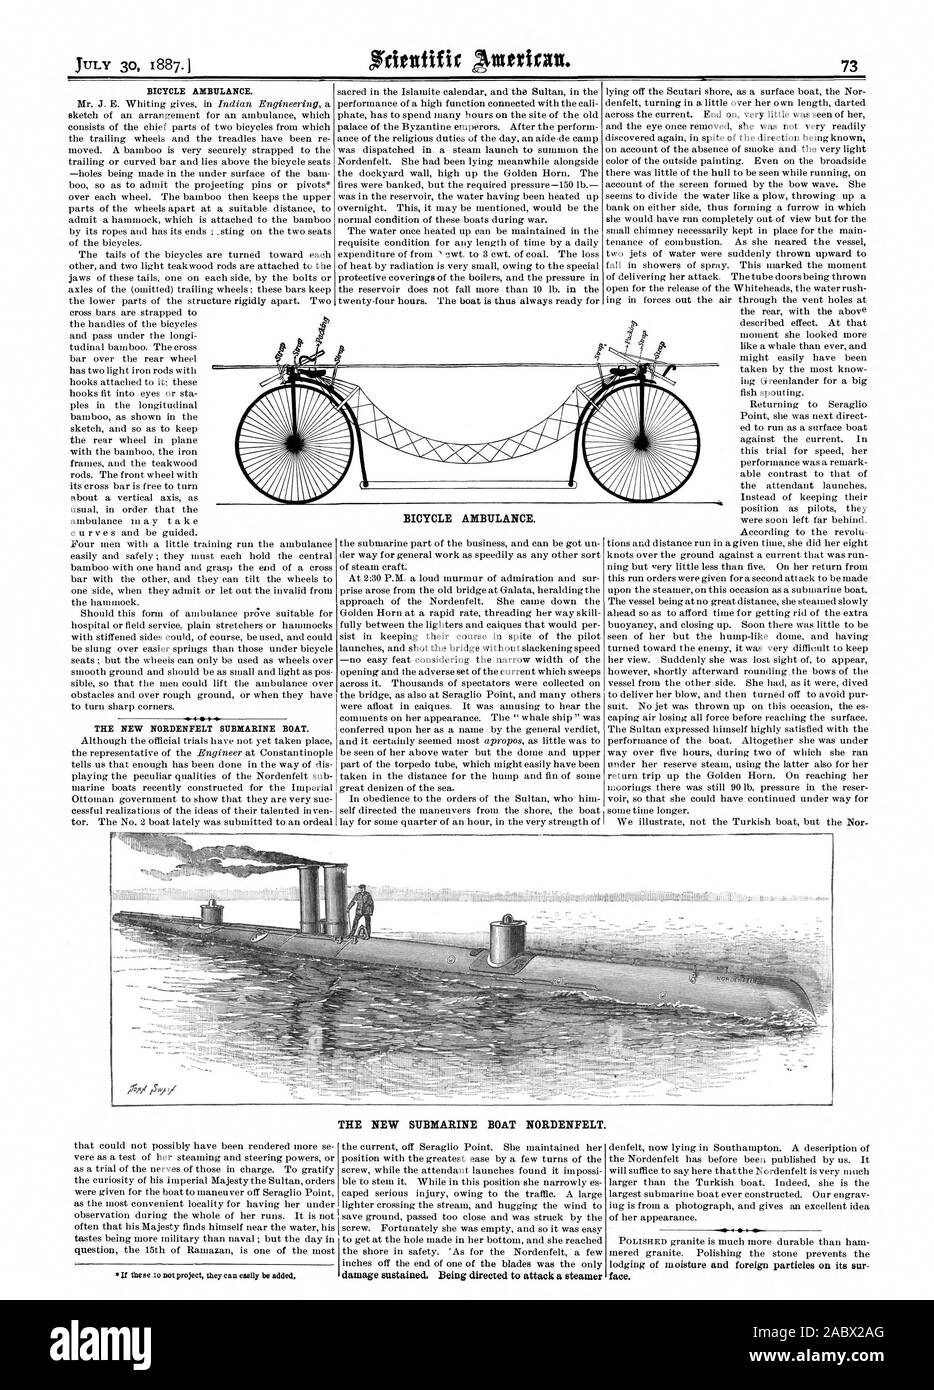 BICYCLE AMBULANCE. THE NEW NORDENFELT SUBMARINE BOAT. BICYCLE AMBULANCE. THE NEW SUBMARINE BOAT NORDENFELT. damage sustained. Being directed to attack a steamer, scientific american, 1887-07-30 Stock Photo